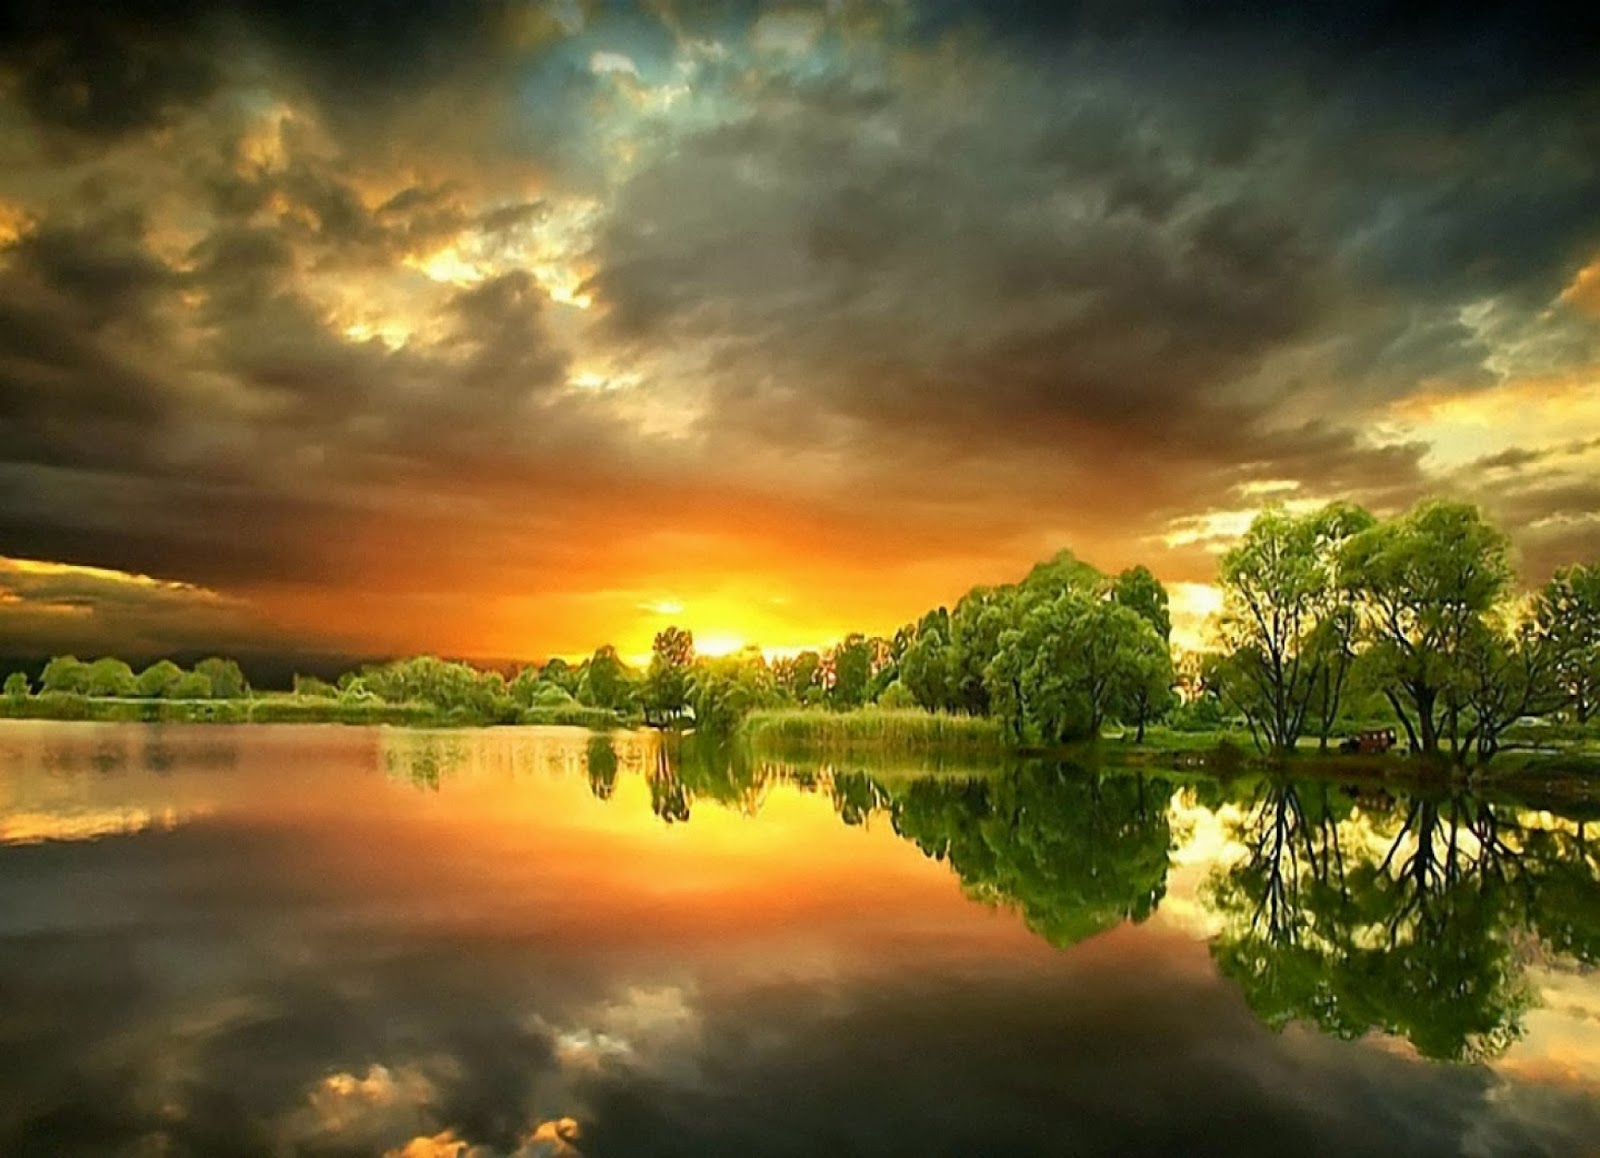 beautiful wallpapers for fb,sky,nature,natural landscape,reflection,water